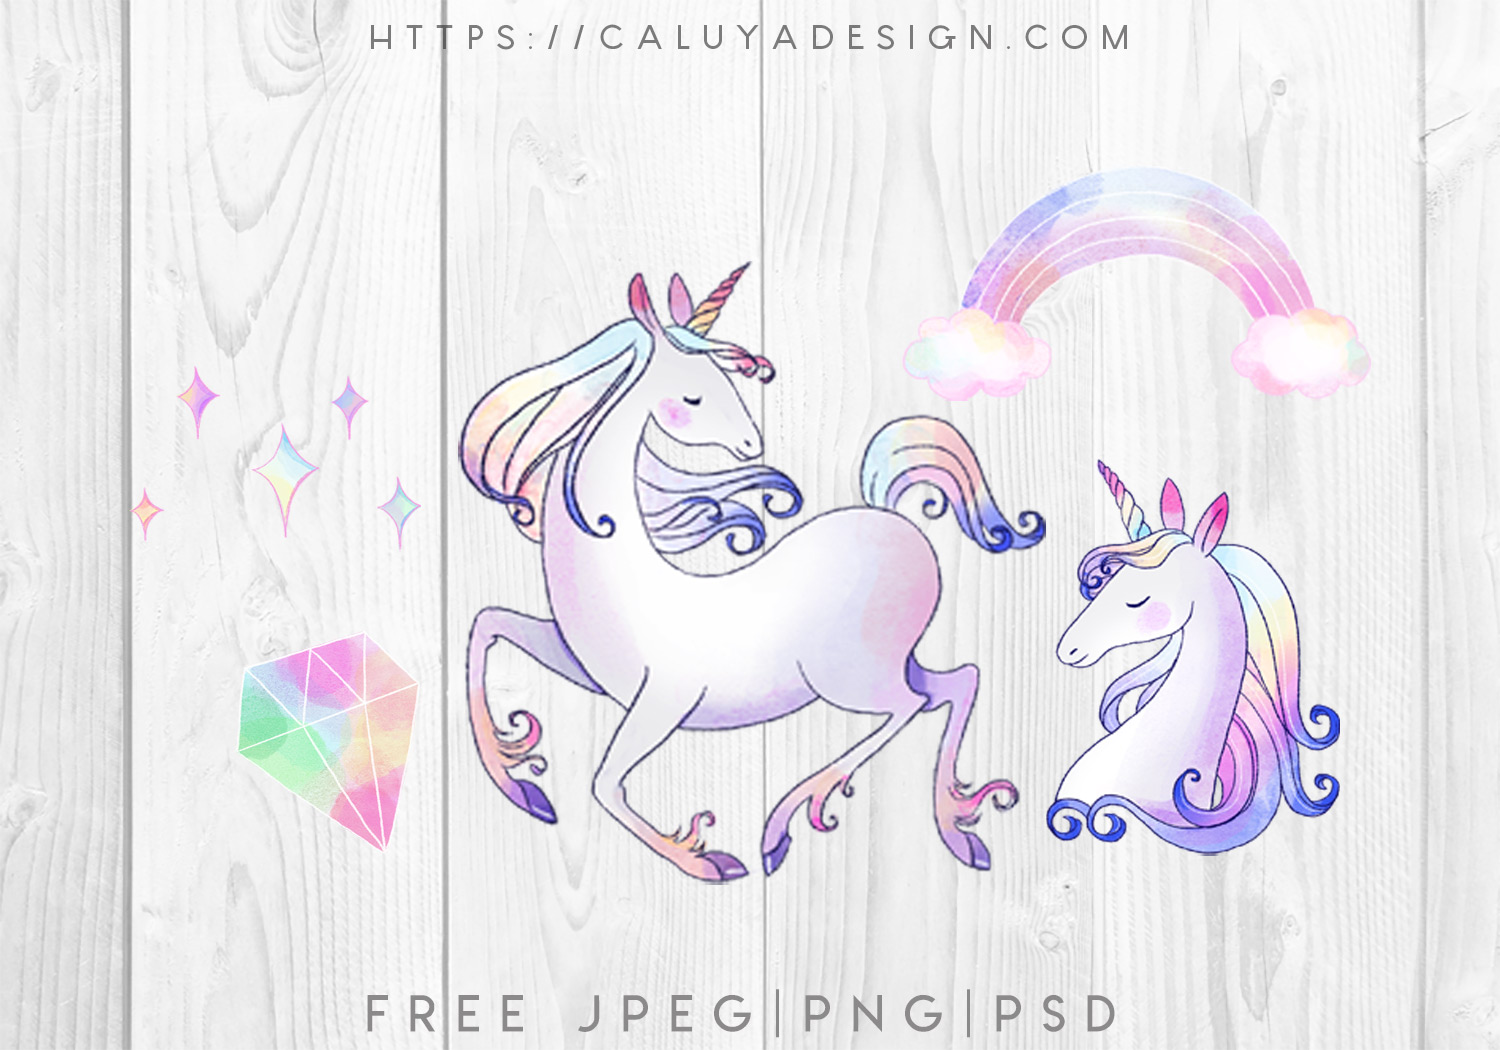 Free Watercolor Magical Unicorn Graphic PNG, JPEG & PSD